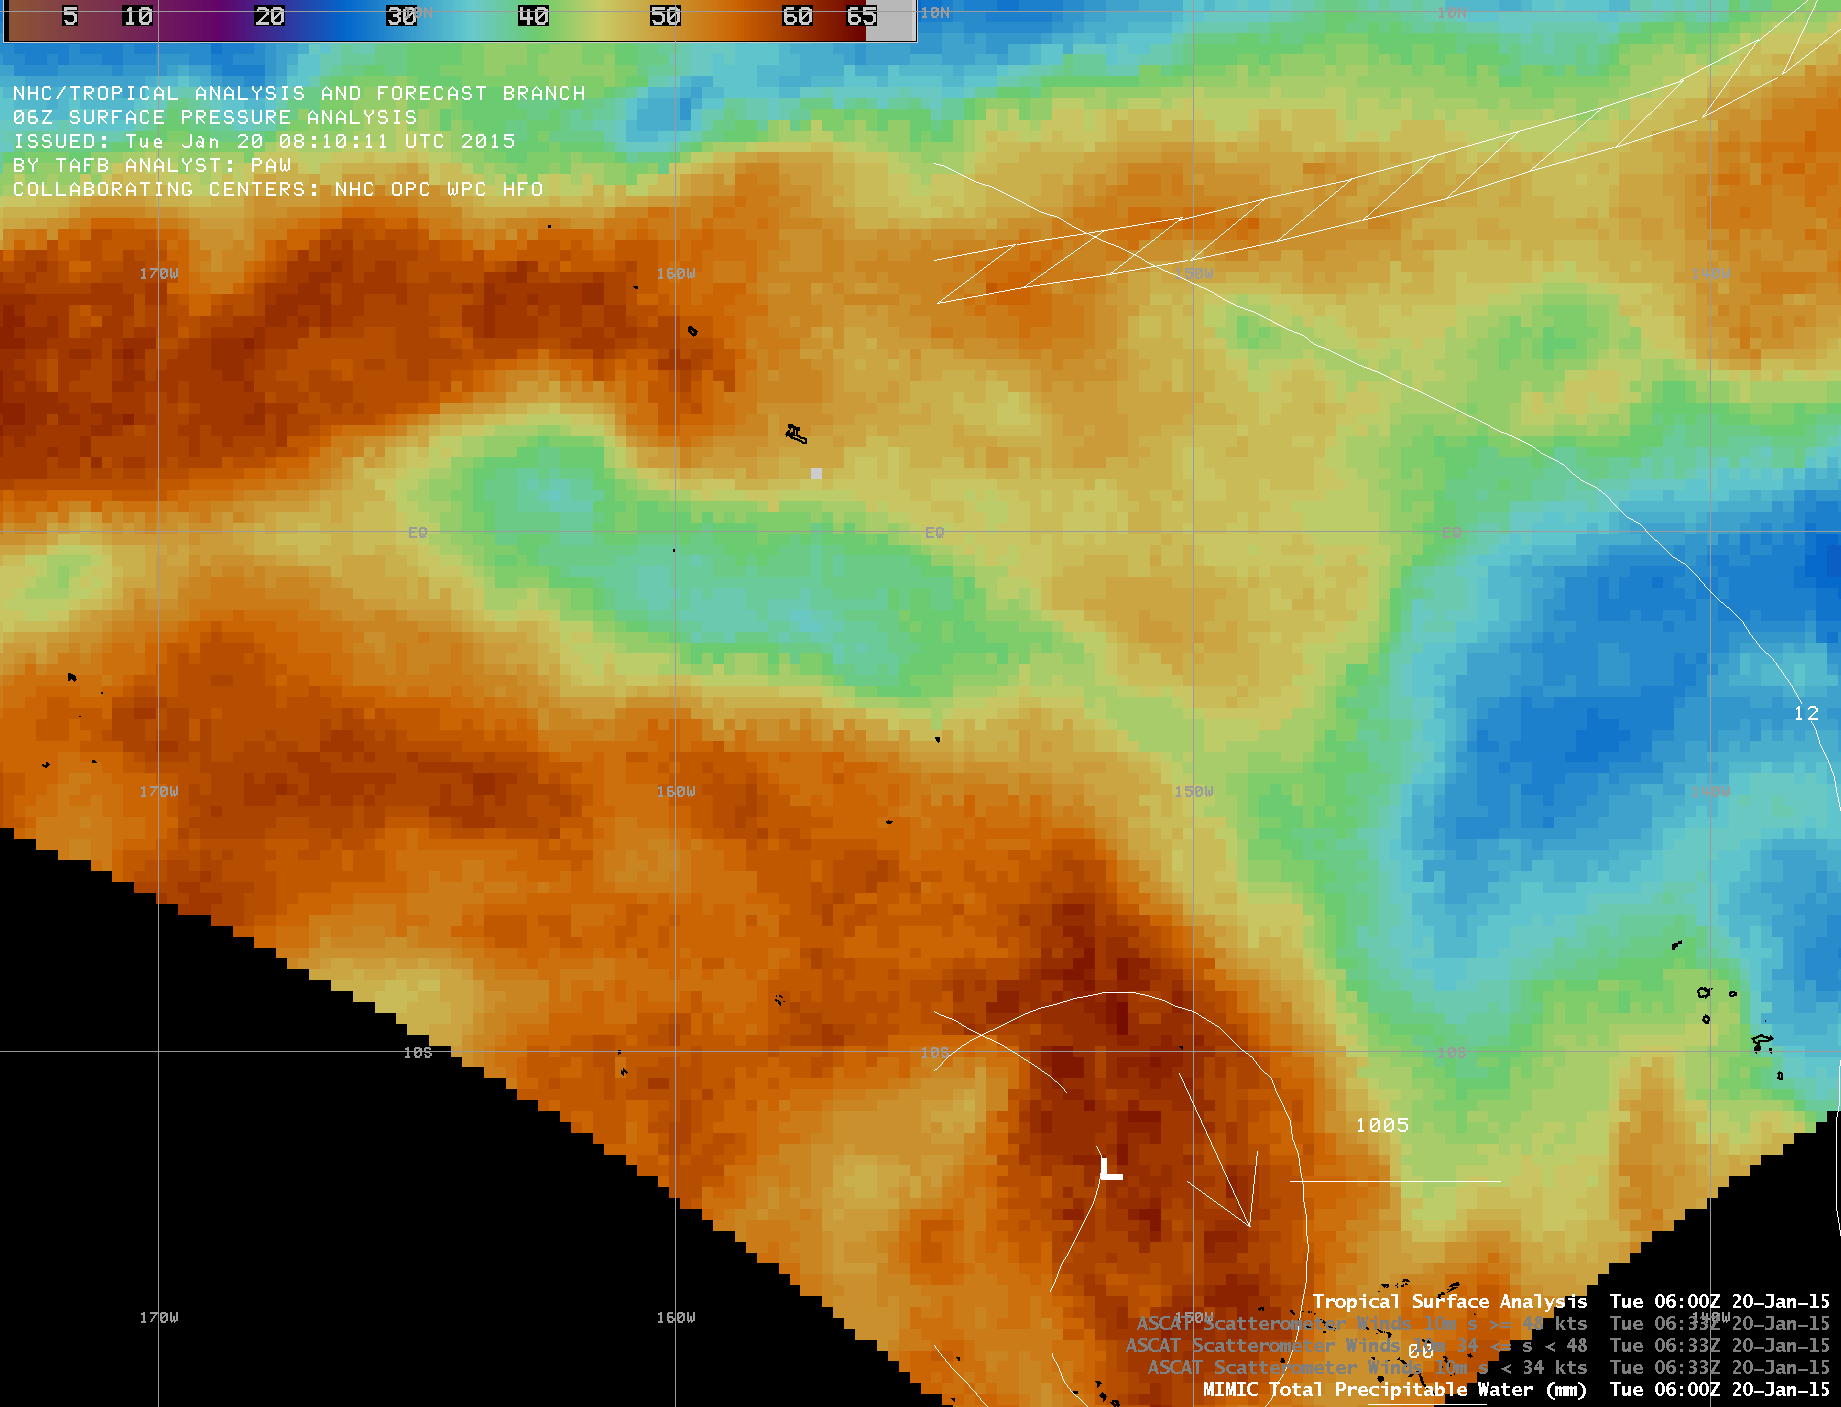 MIMIC Total Precipitable Water product, with Tropical Surface Analyses (click to play animation)